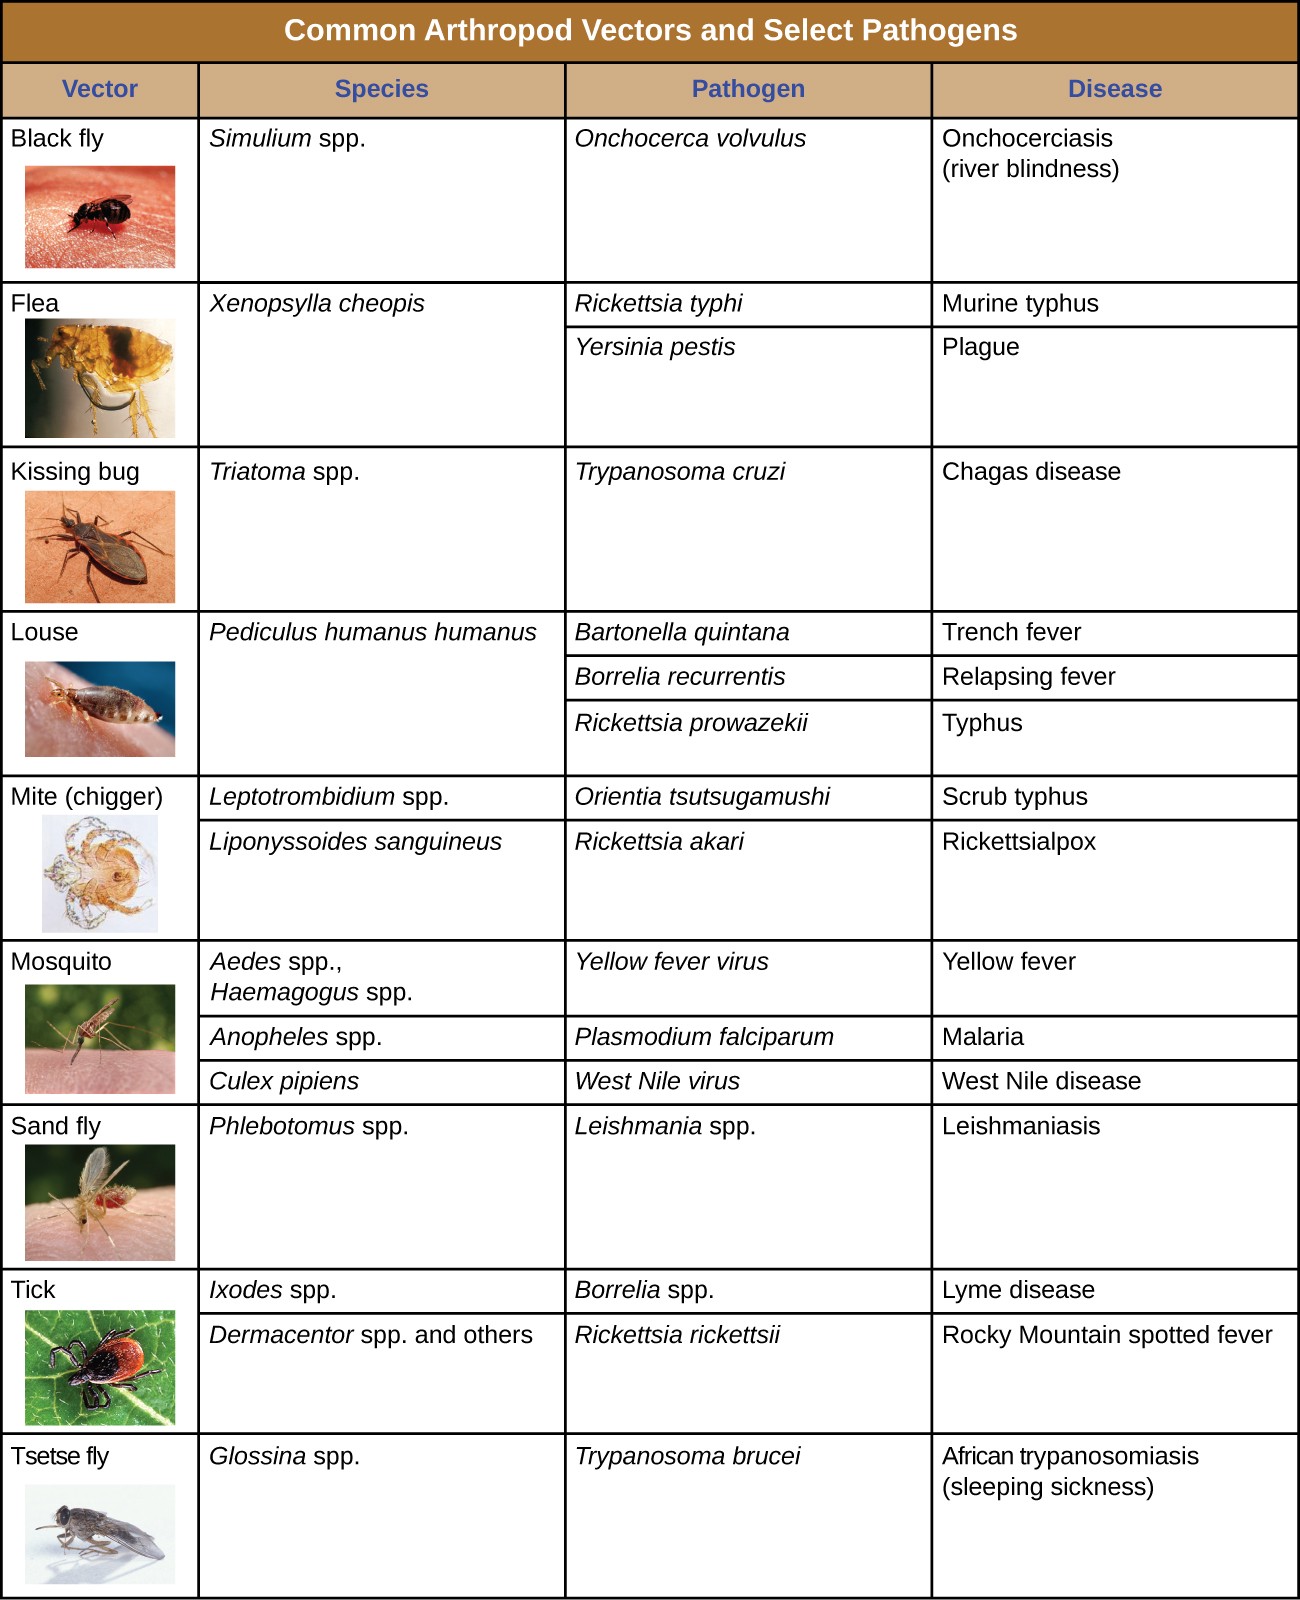 Table titled common arthropod vectors and selected pathogens